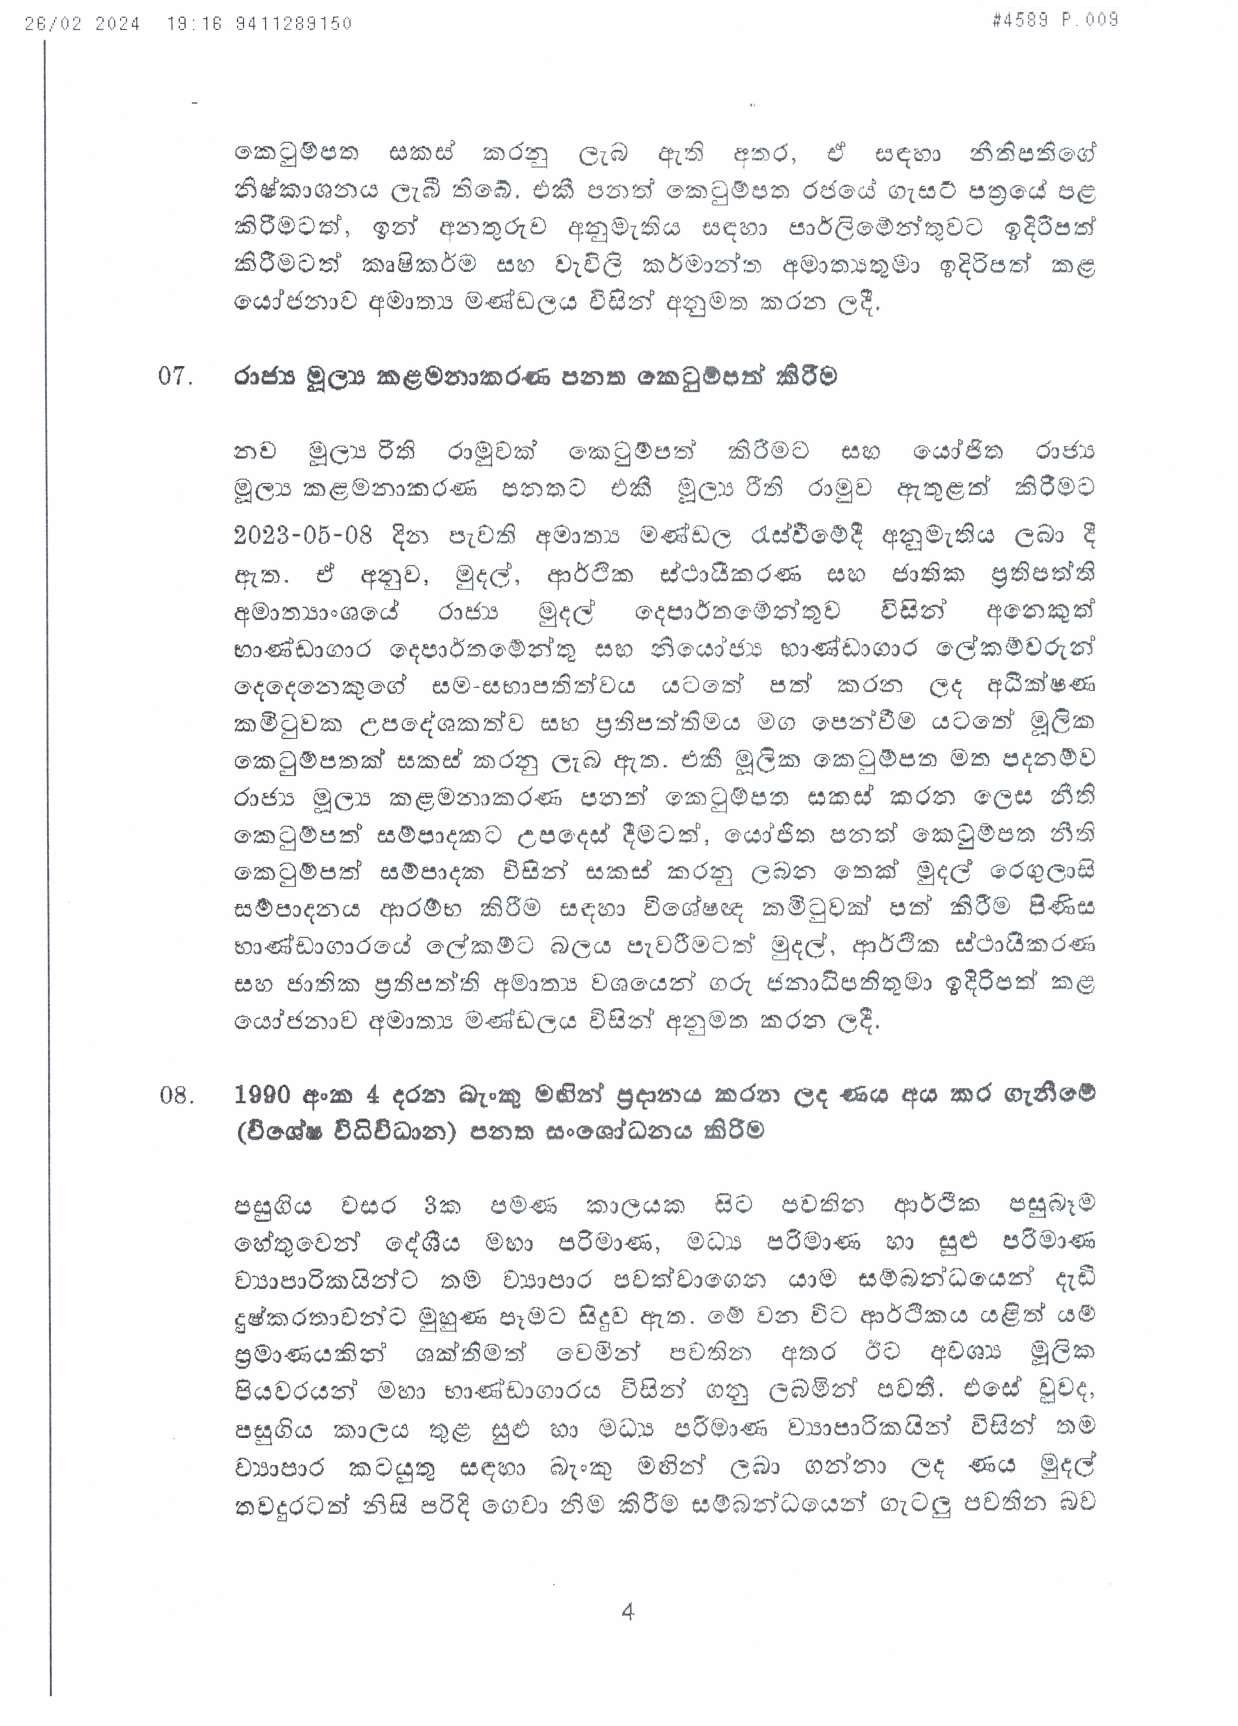 Cabinet Decision on 26.02.2024 page 004